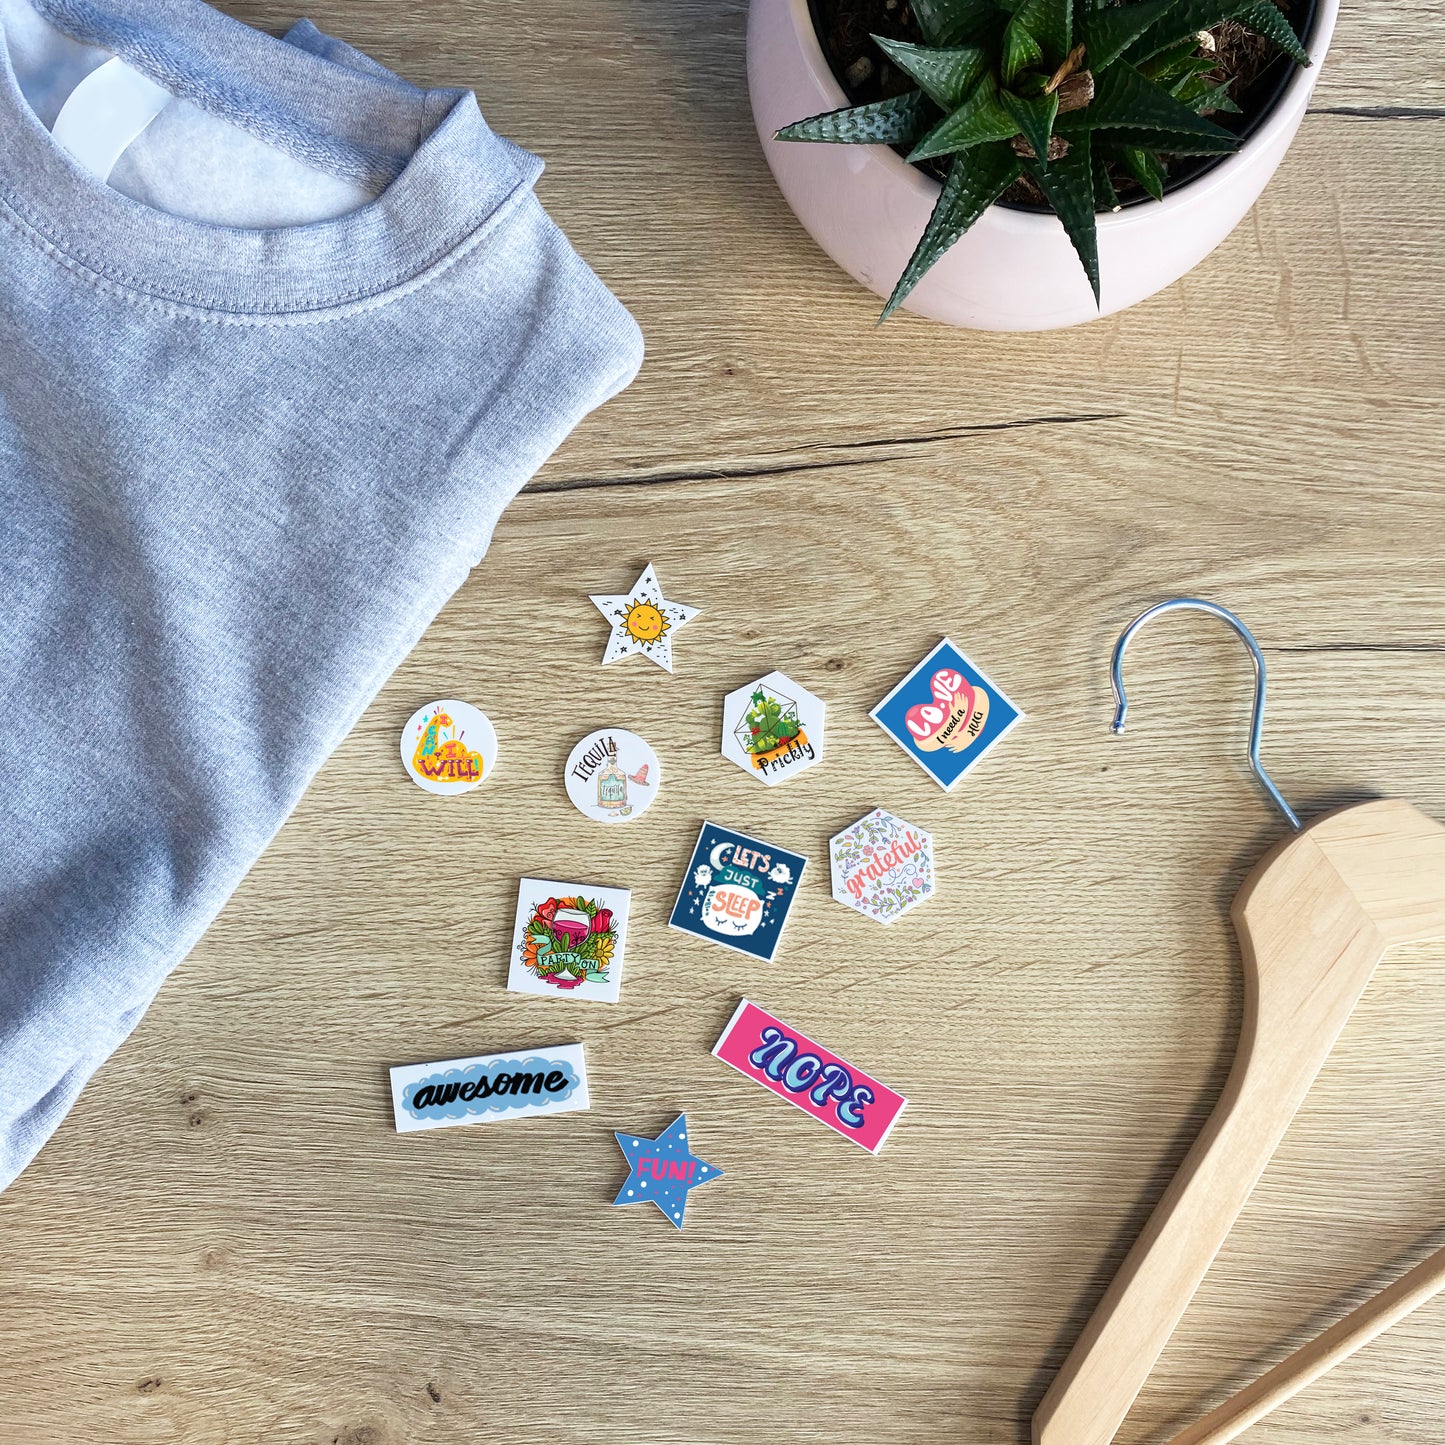 Pins for sweatshirt with changeable pins enamel pins and sweatshirt